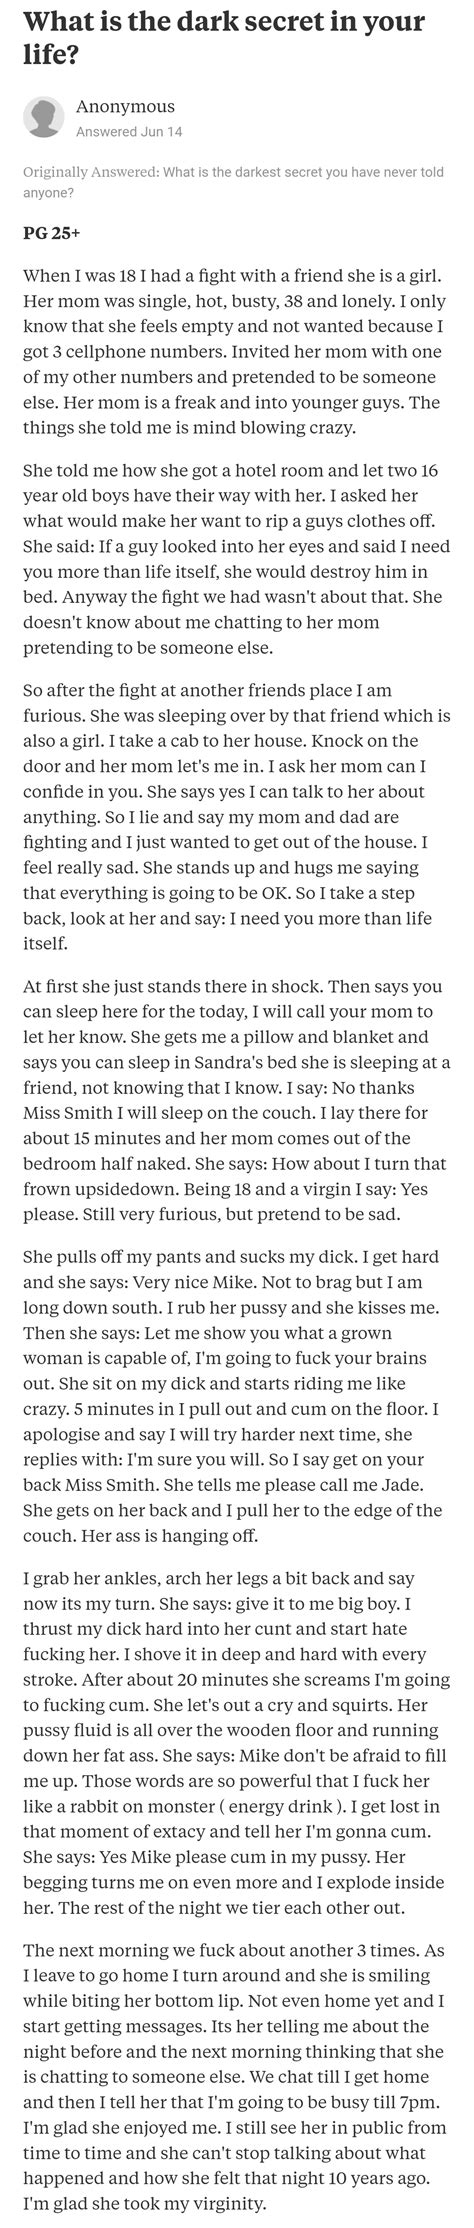 quora has become a dump for anonymous sex stories 😂 indianpeoplequora